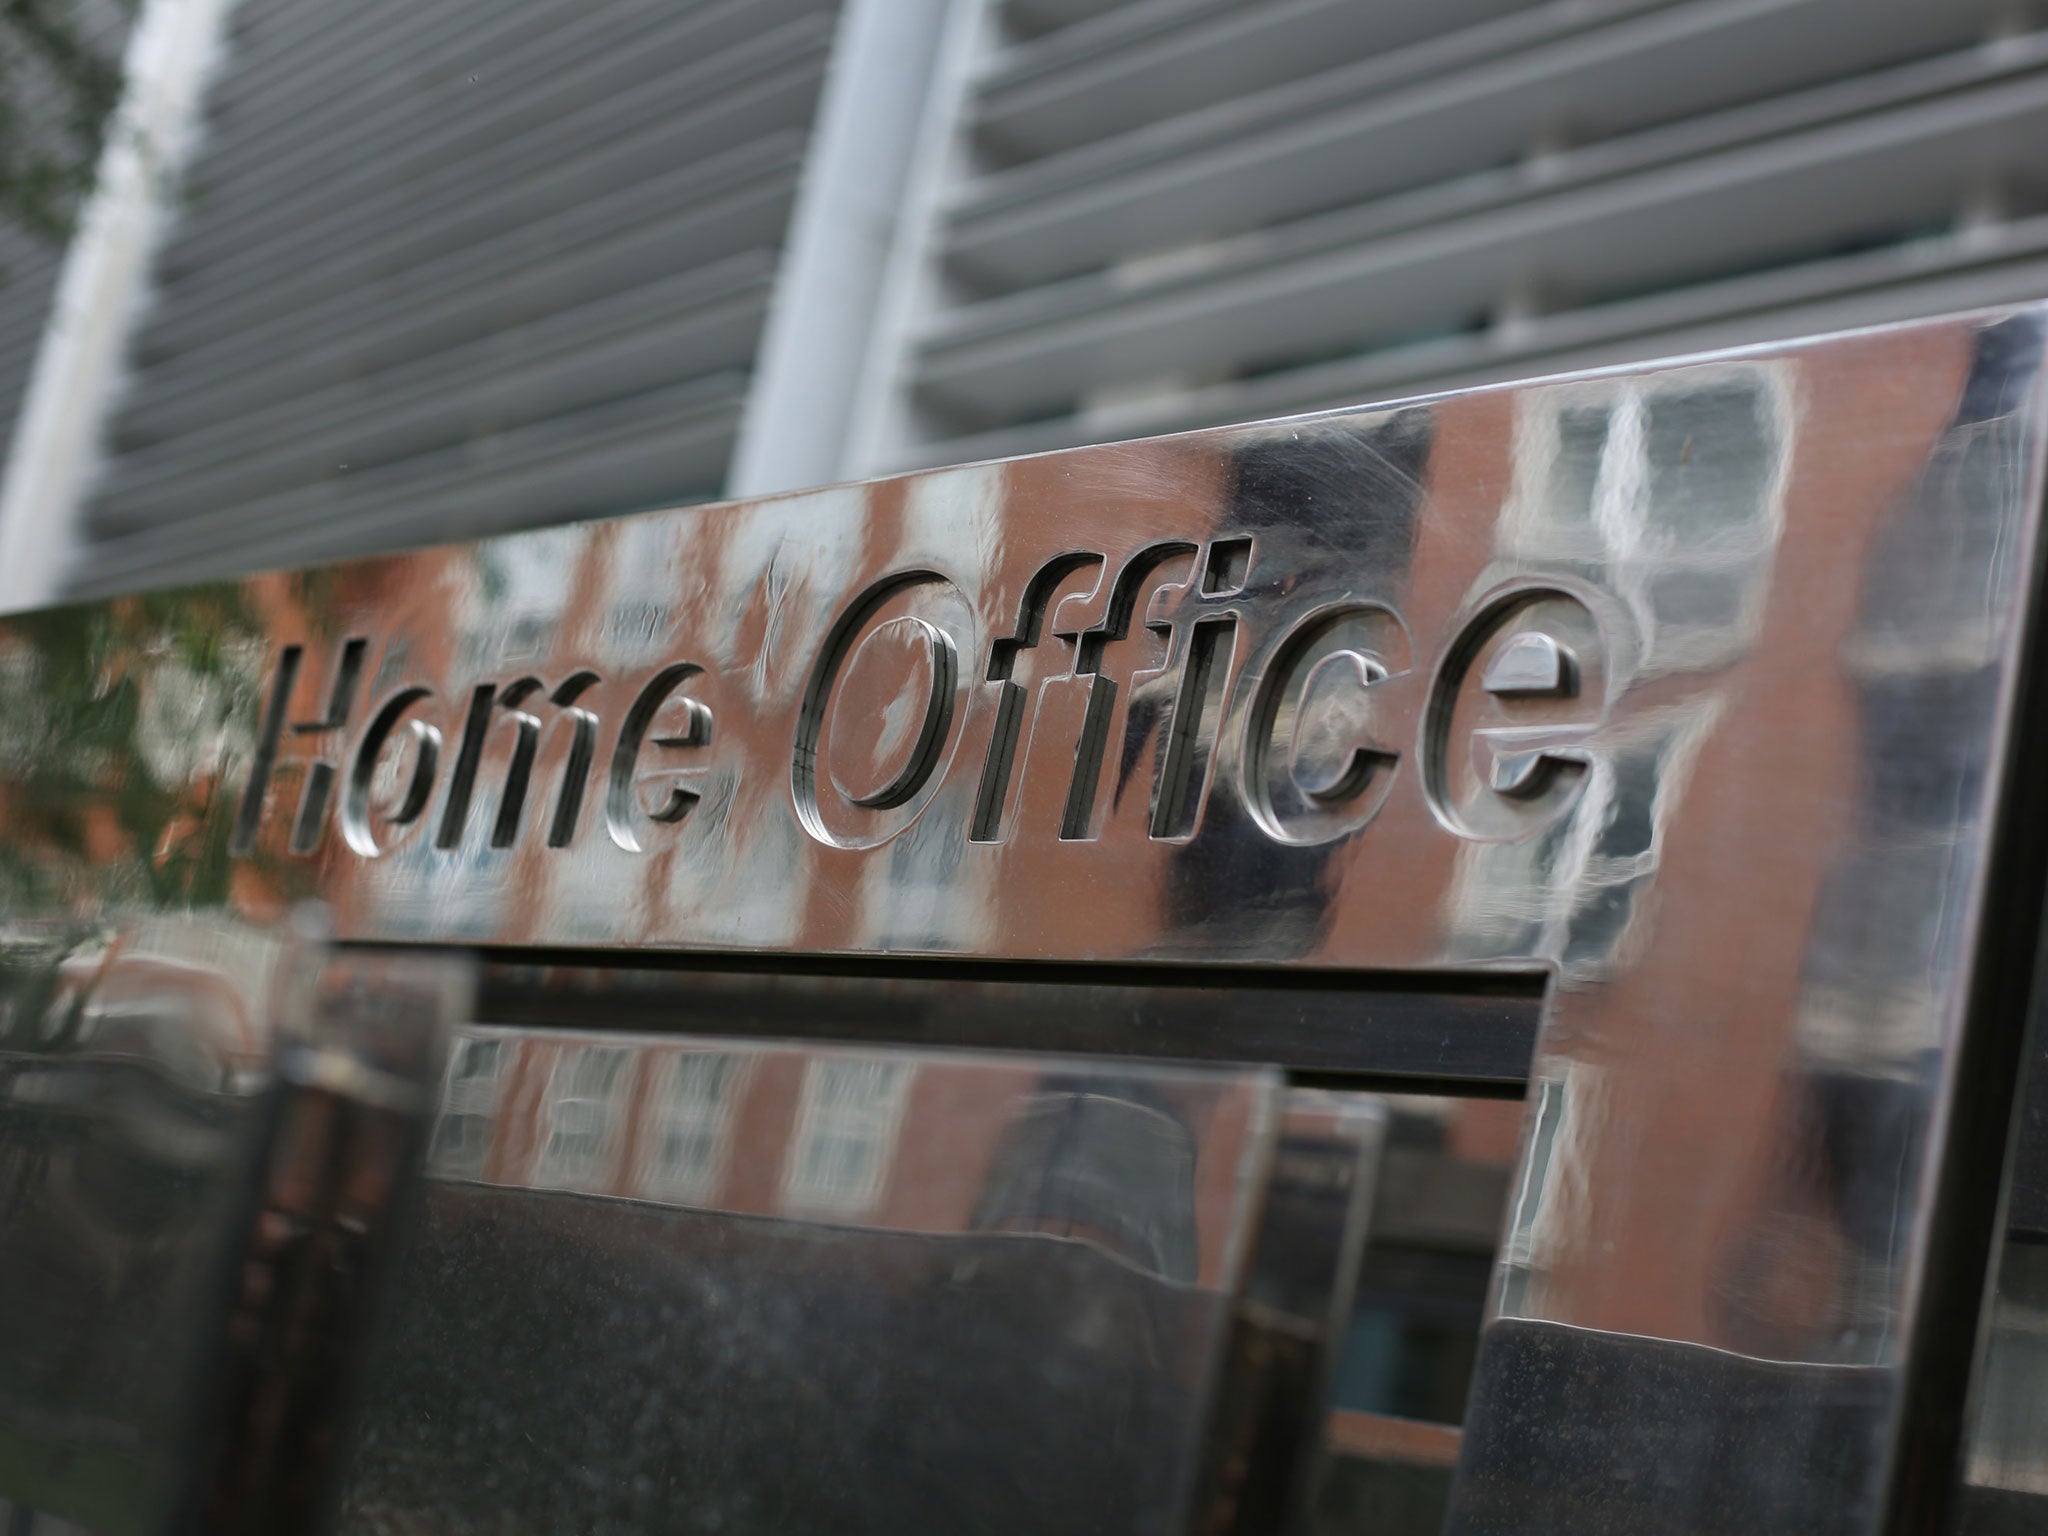 The Home Office has privatised its customer services function and started charging applicants £5.48 to send an email